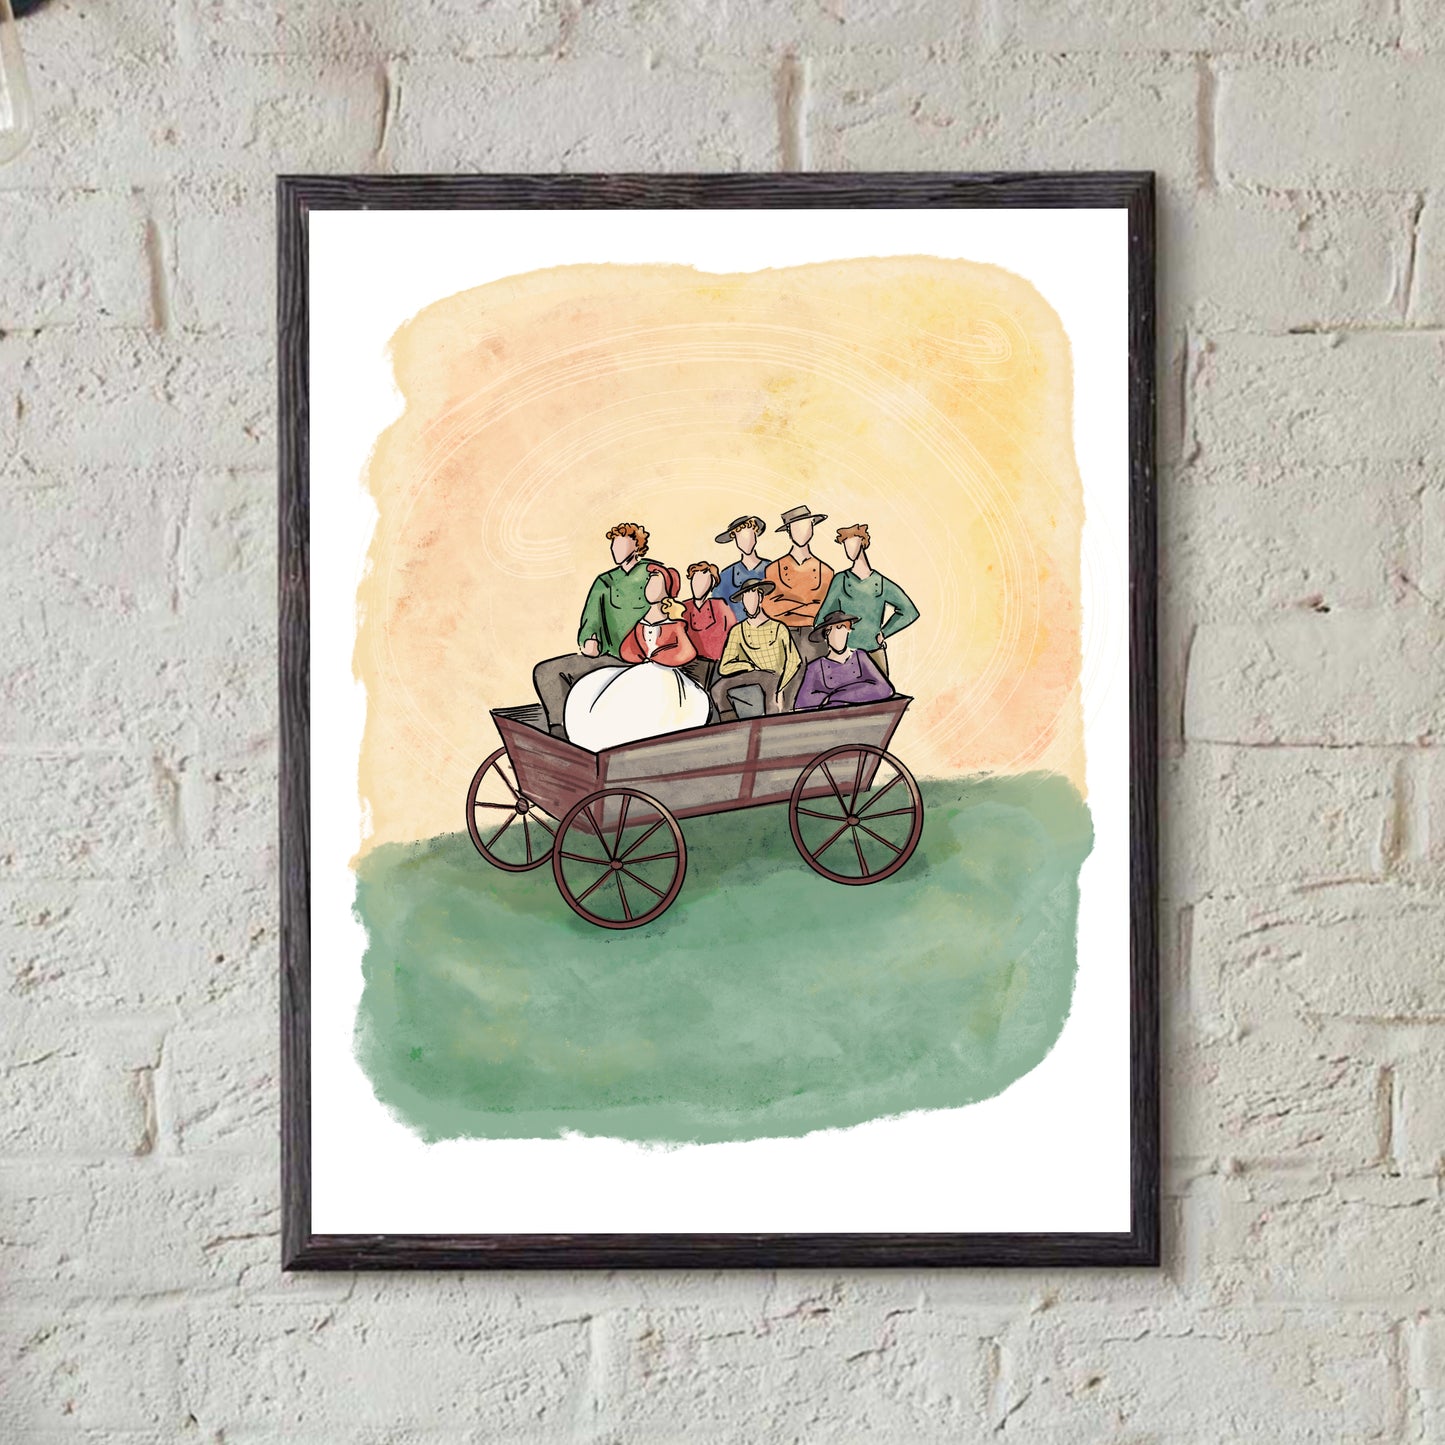 Seven Brothers in Wagon - Seven Brides for Seven Brothers Inspired print